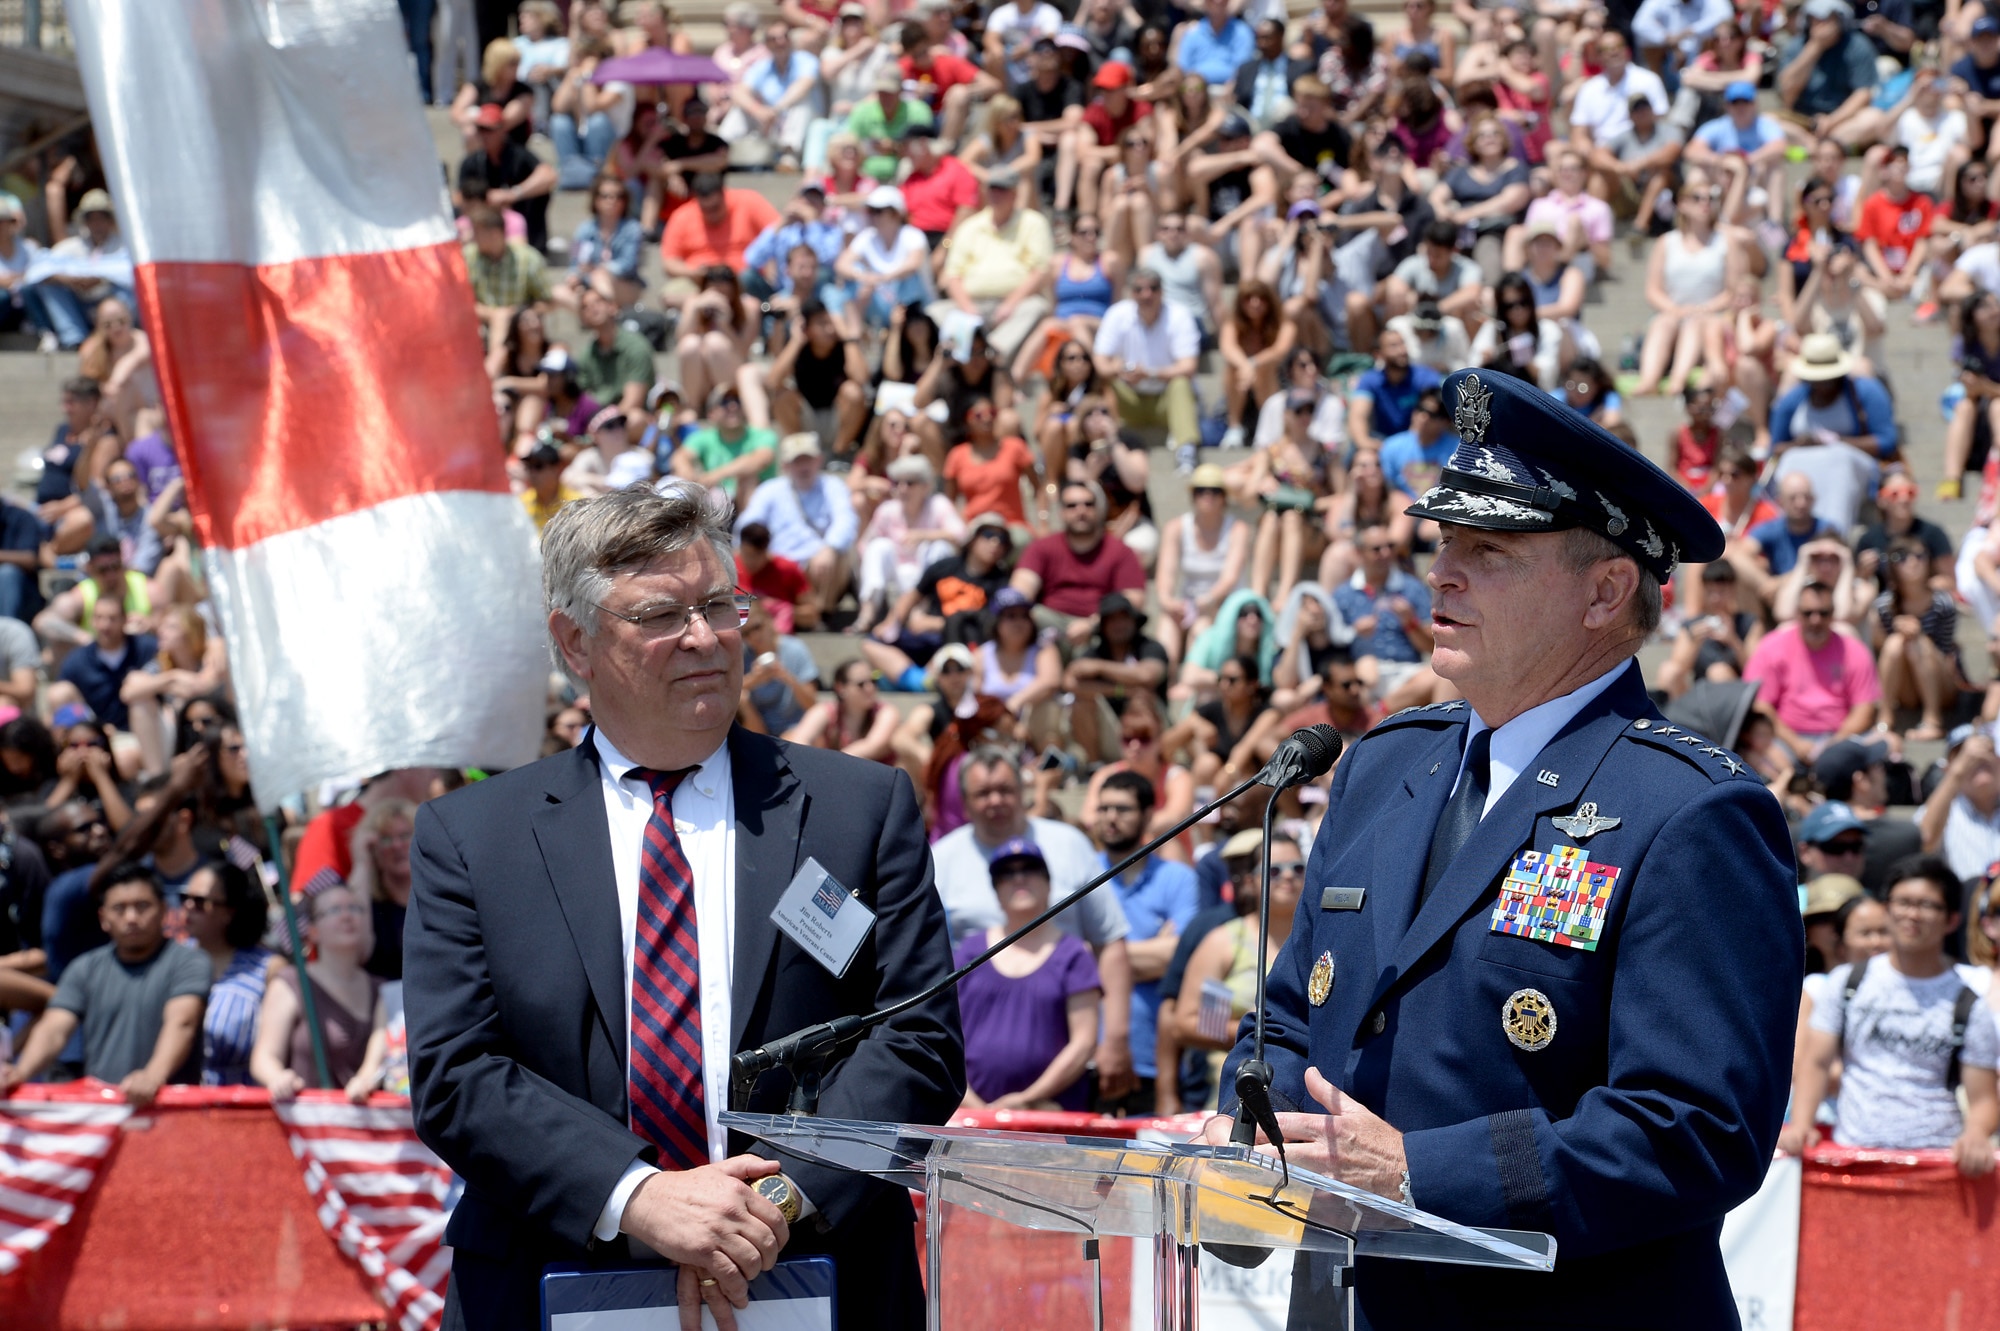 Air Force Chief of Staff Gen. Mark A. Welsh III kicks off the National Memorial Day Parade with Jim Roberts, the American Veterans Center president, in Washington, D.C., May 25, 2015. The National Memorial Day Parade was launched in 2005 by the American Veterans Center in Washington. Welsh also honored American veterans by attending a wreath-laying ceremony in Arlington National Cemetery. (U.S. Air Force photo/Scott M. Ash)